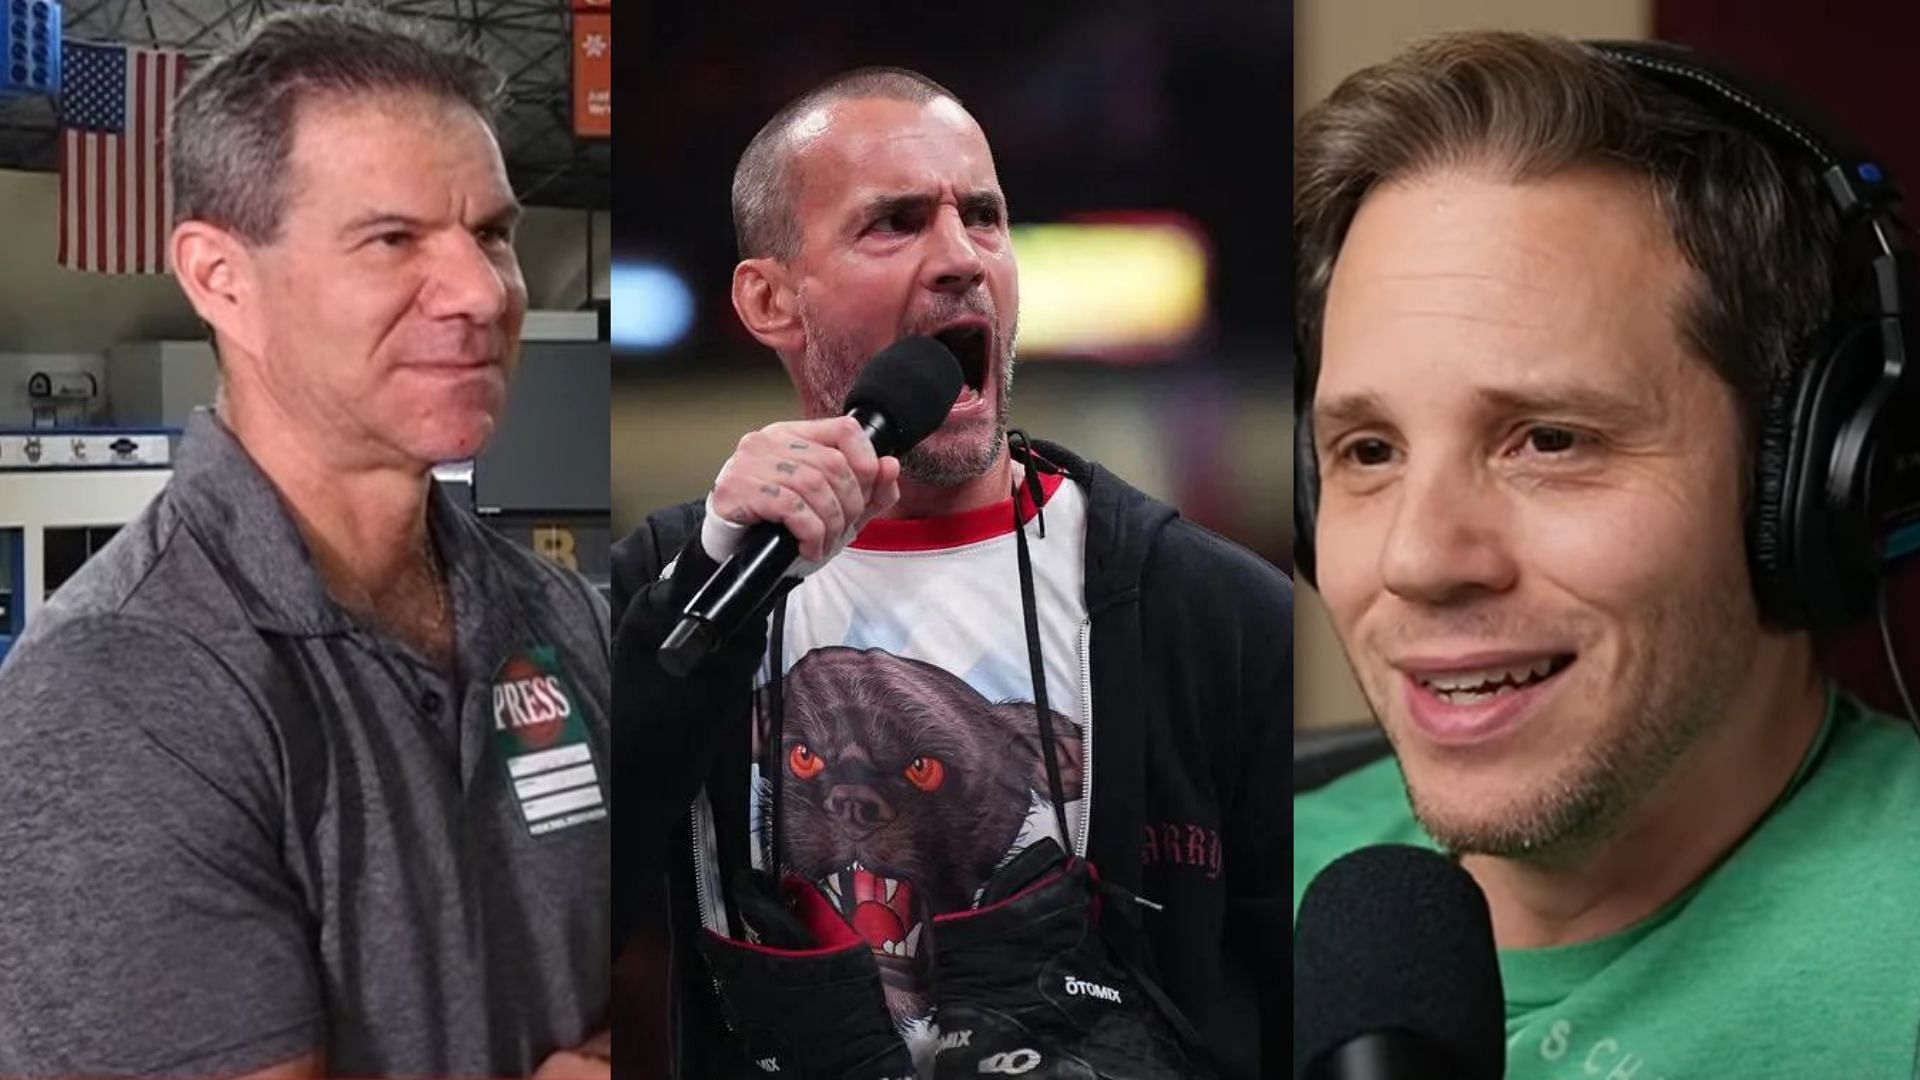 Dave Meltzer and Bryan Alvarez are well-known journalists